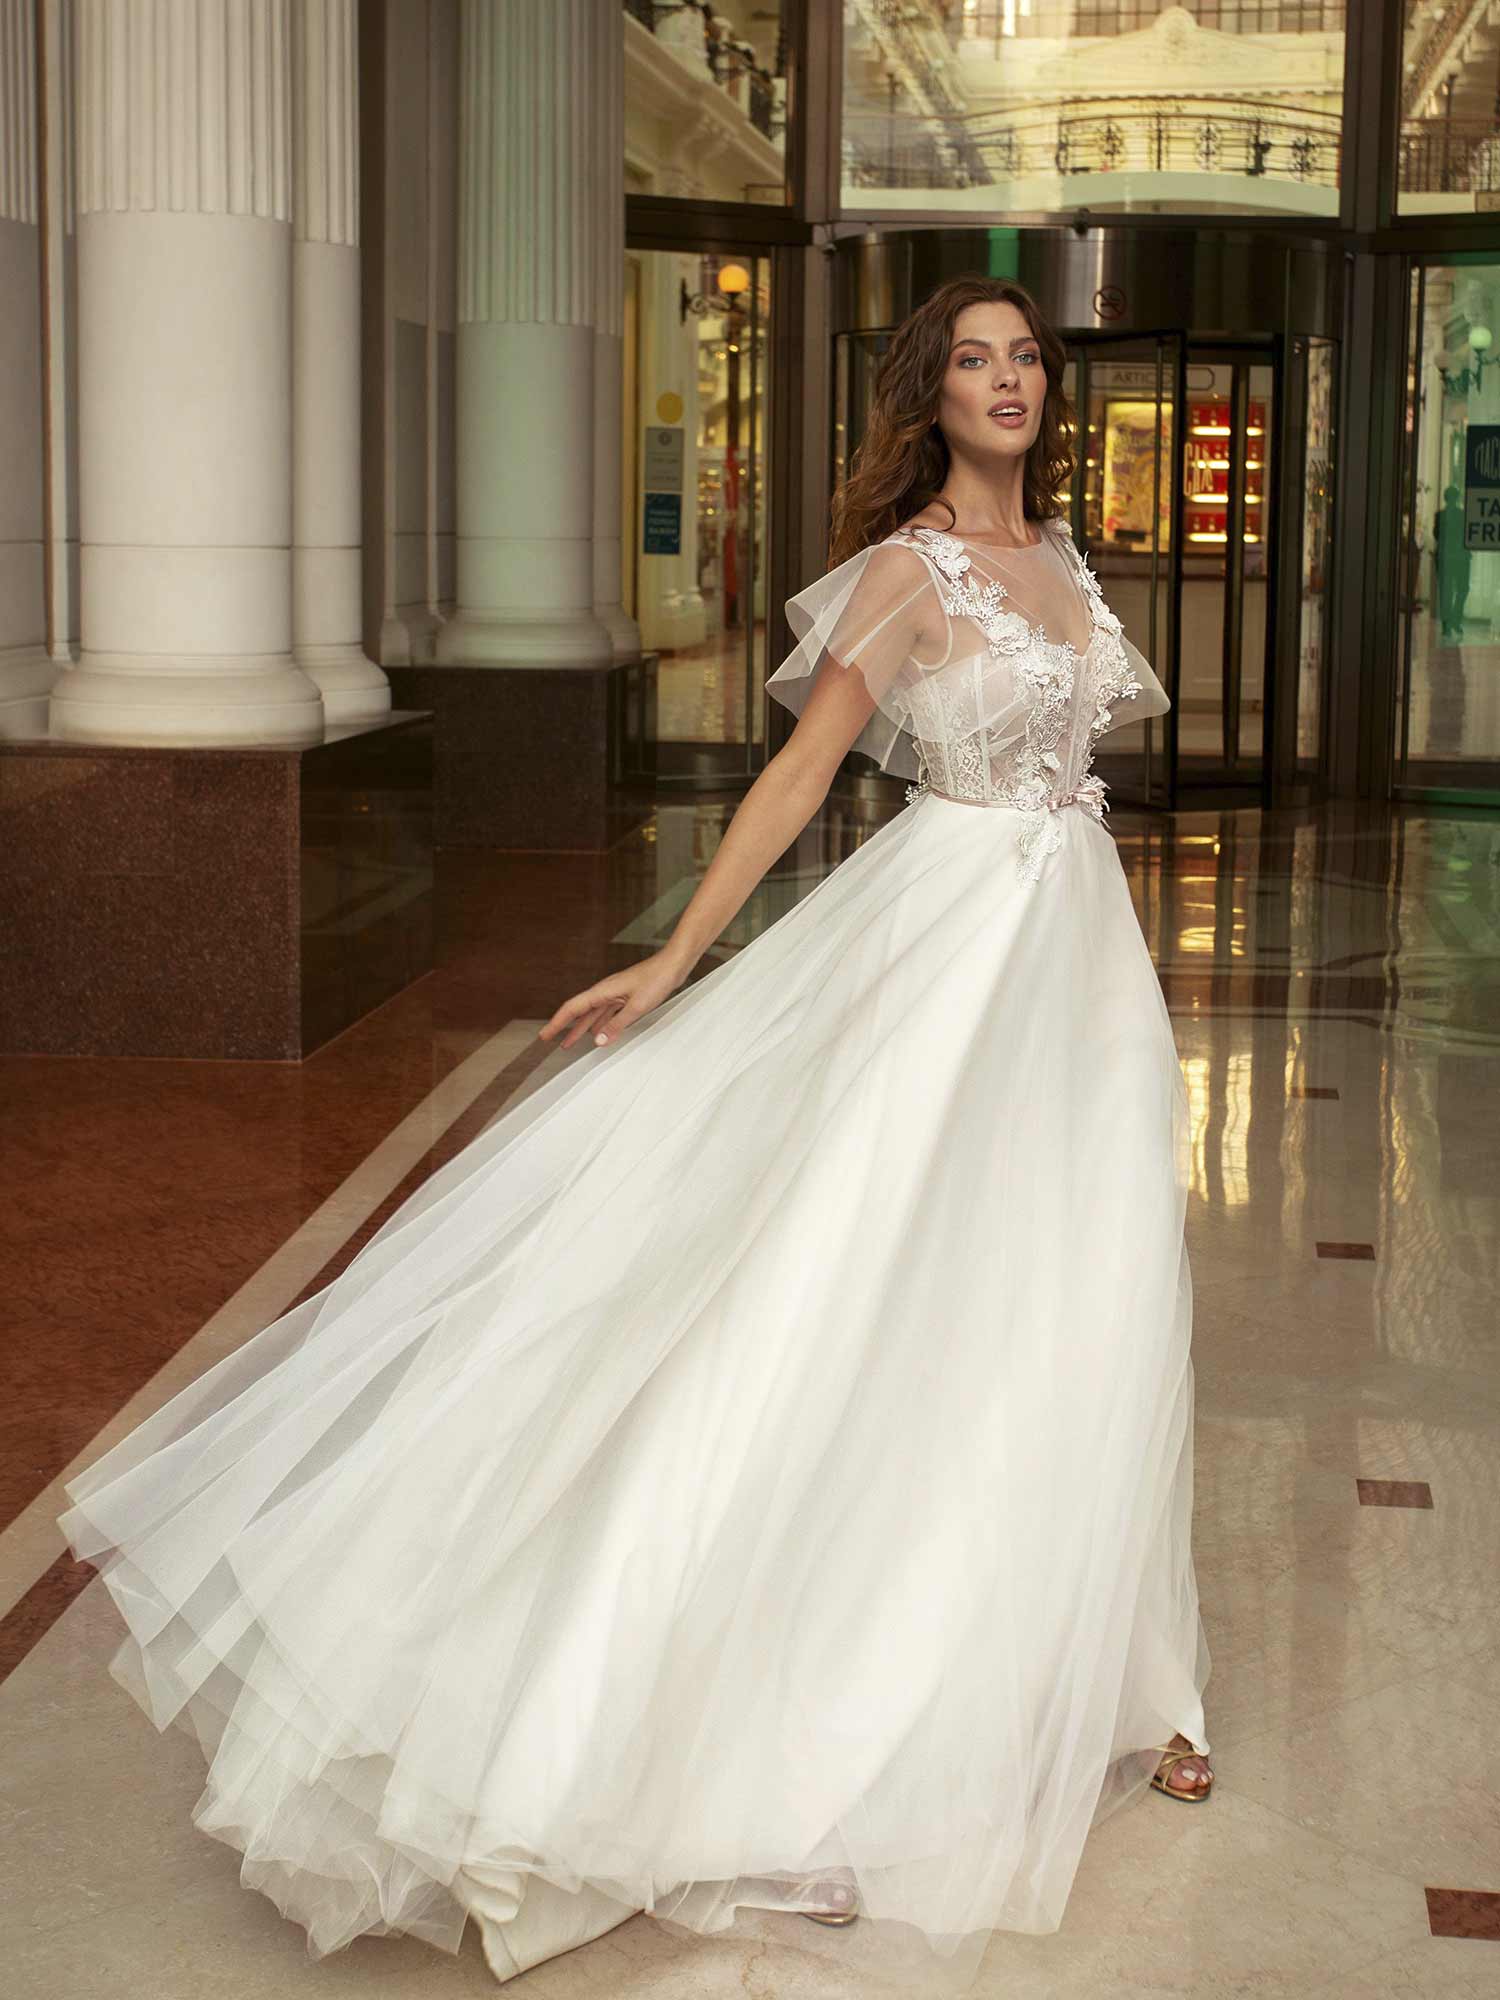 Cape sleeved wedding dress with illusion neckline and floral applique